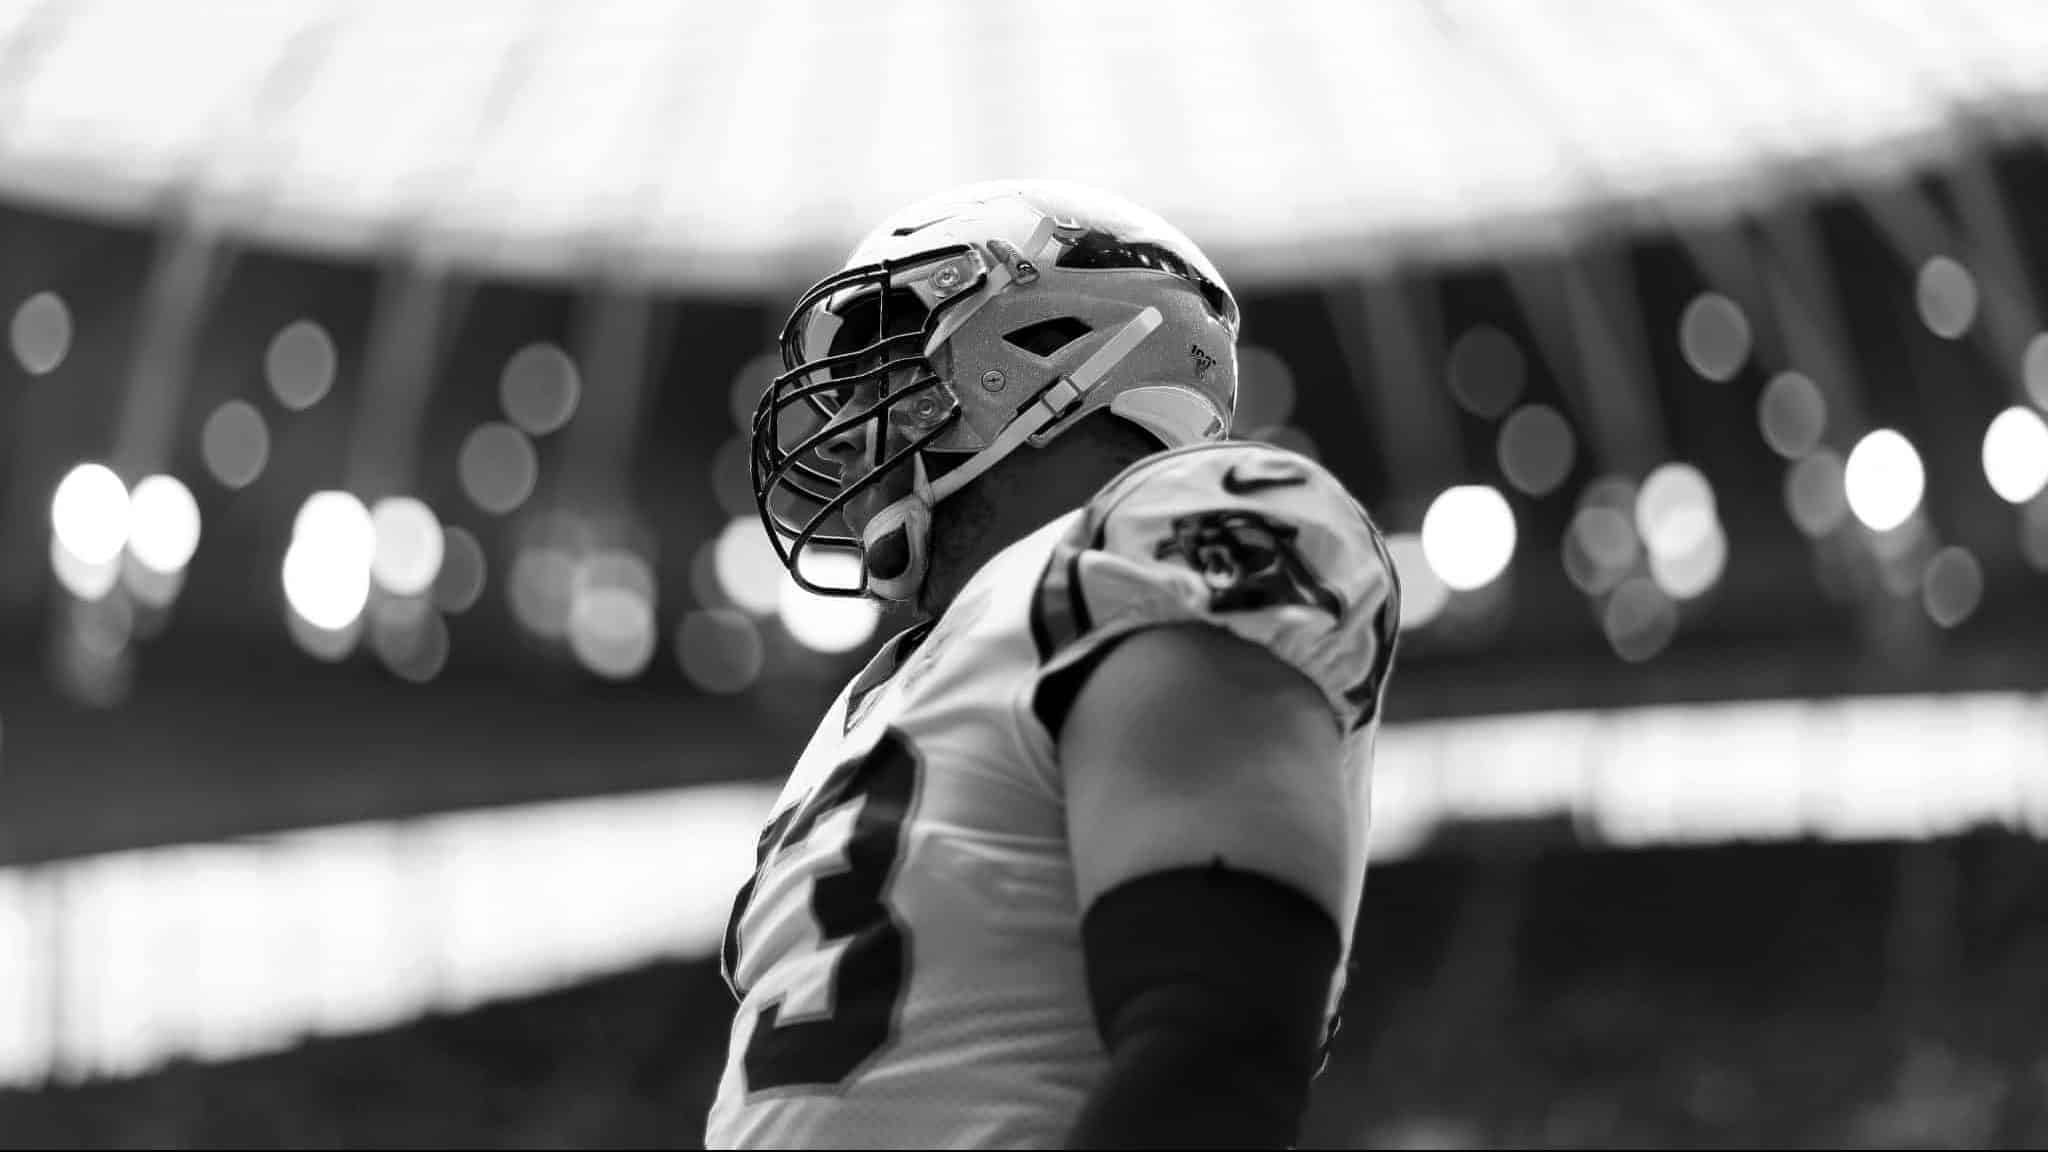 LONDON, ENGLAND - OCTOBER 13: (EDITORS NOTE - This image has been converted to black and white) Greg Van Roten of Carolina Panthers looks on during the NFL game between Carolina Panthers and Tampa Bay Buccaneers at Tottenham Hotspur Stadium on October 13, 2019 in London, England.